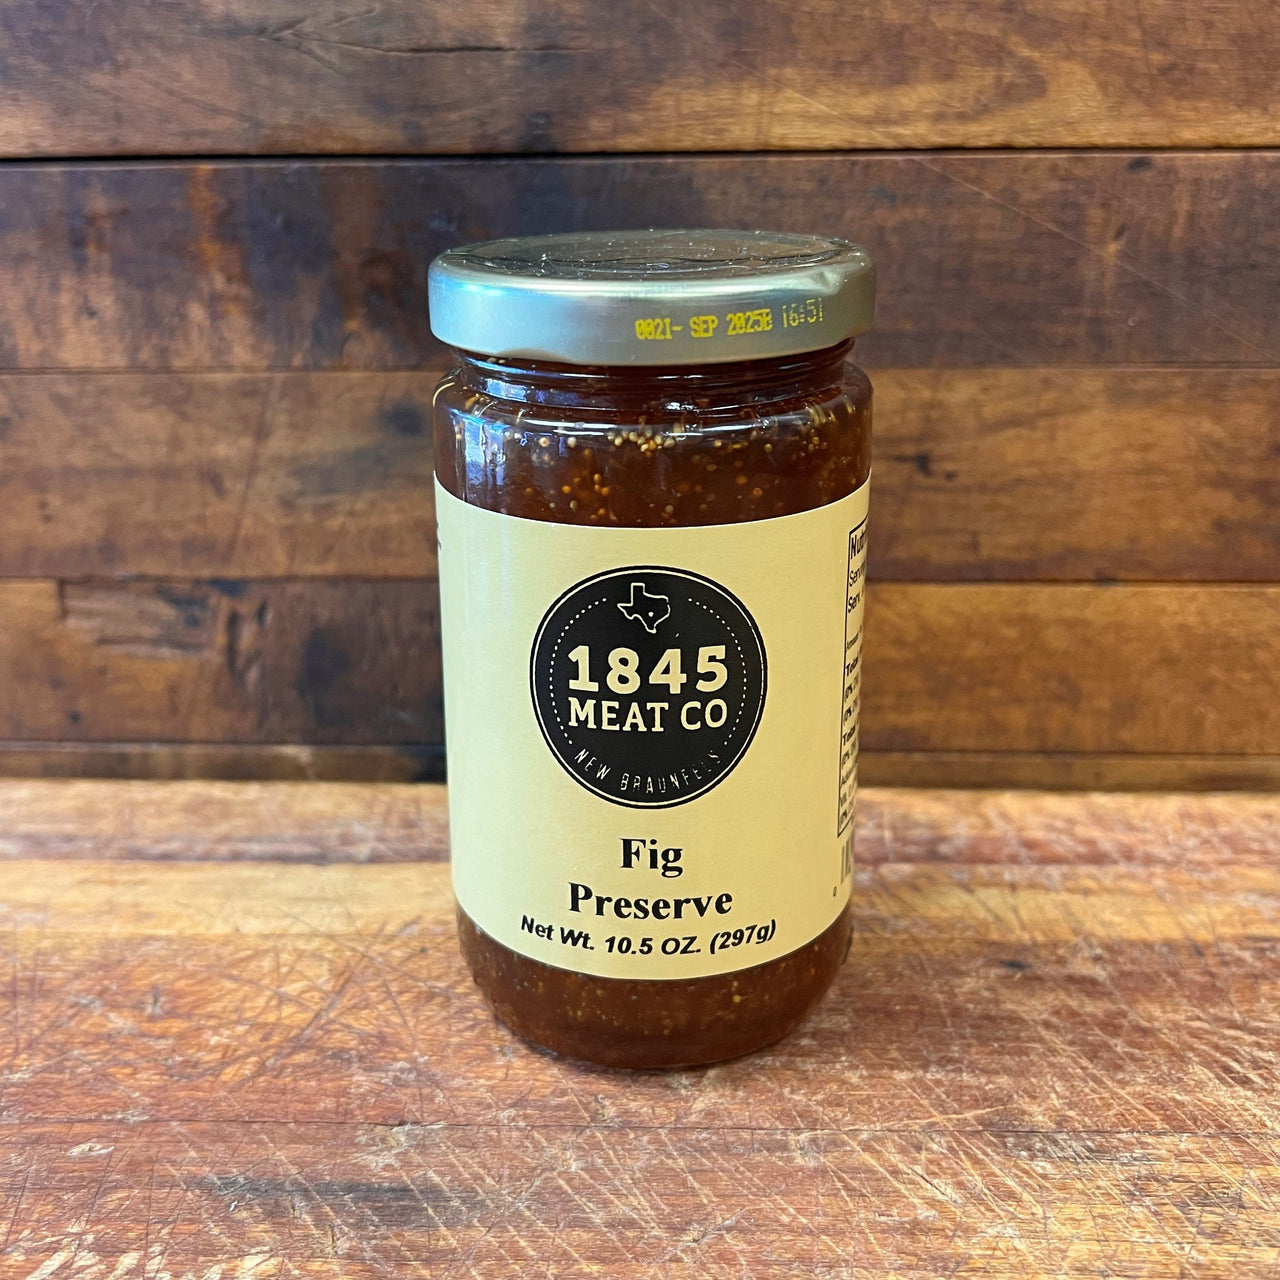 This is a Fig Preserve that brings back memories of breakfast on the weekend when you were a kid at your grandparents.  A classic flavor!